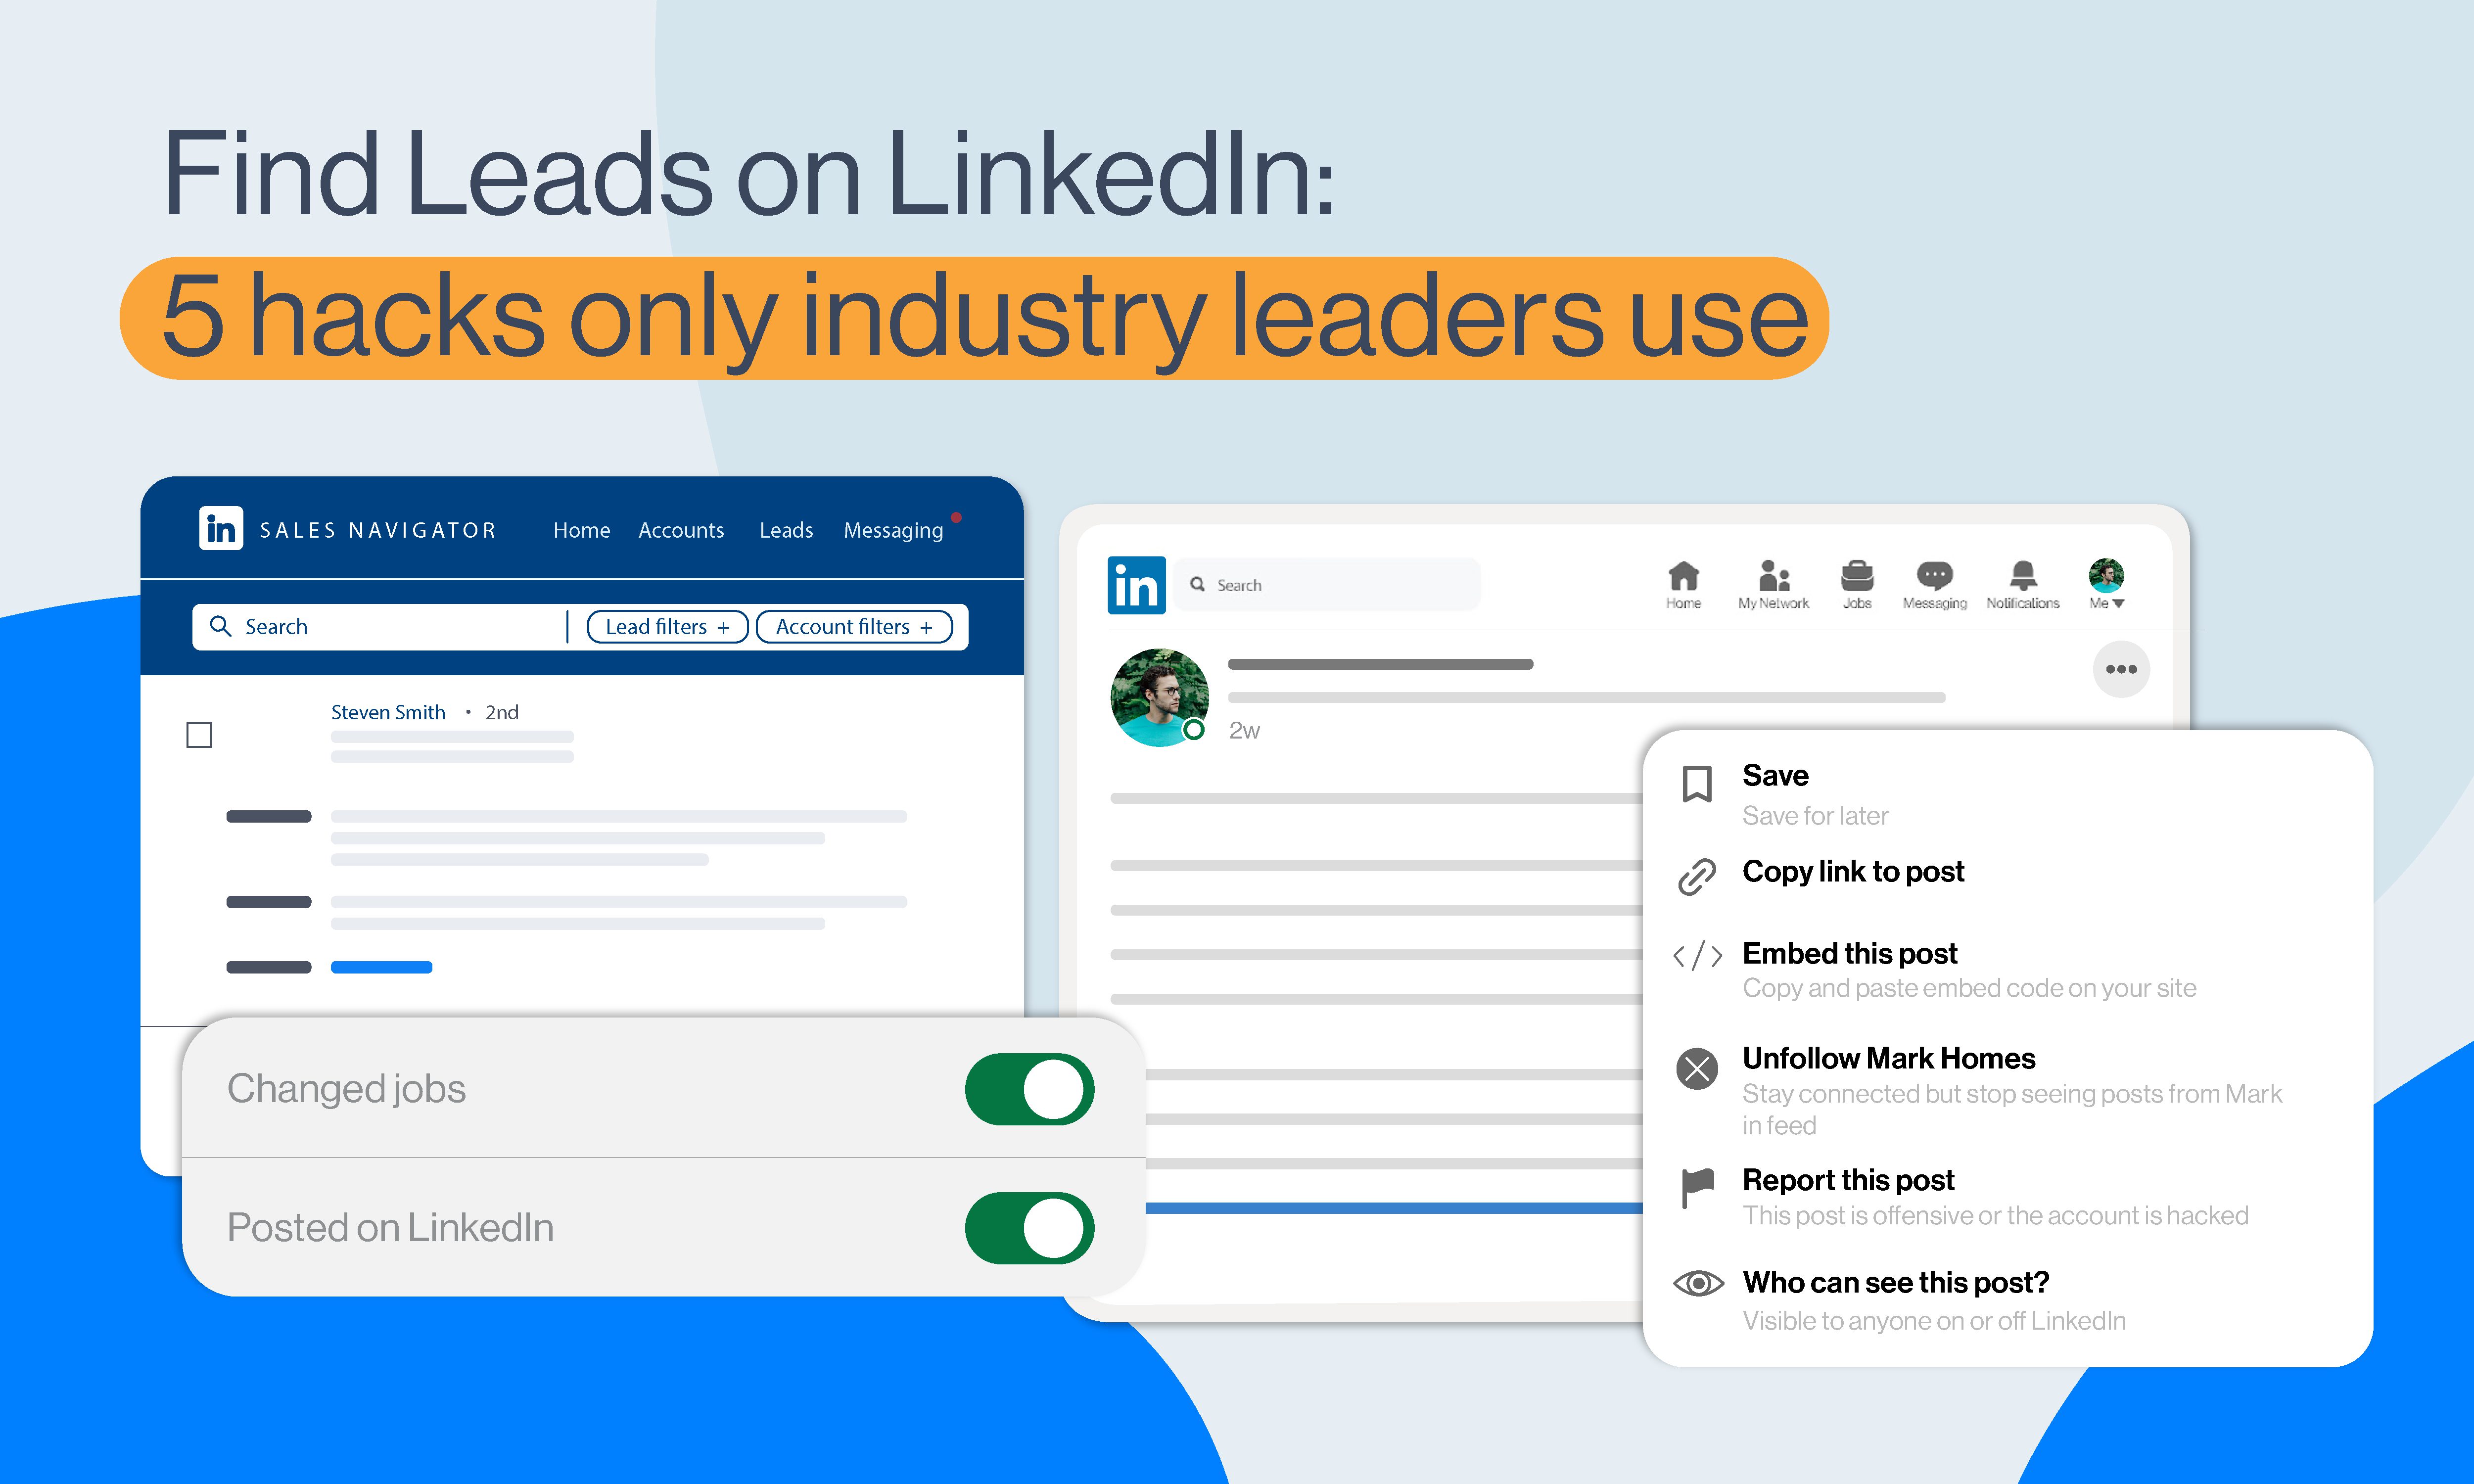 Find leads on LinkedIn - 5 hacks only industry leaders know